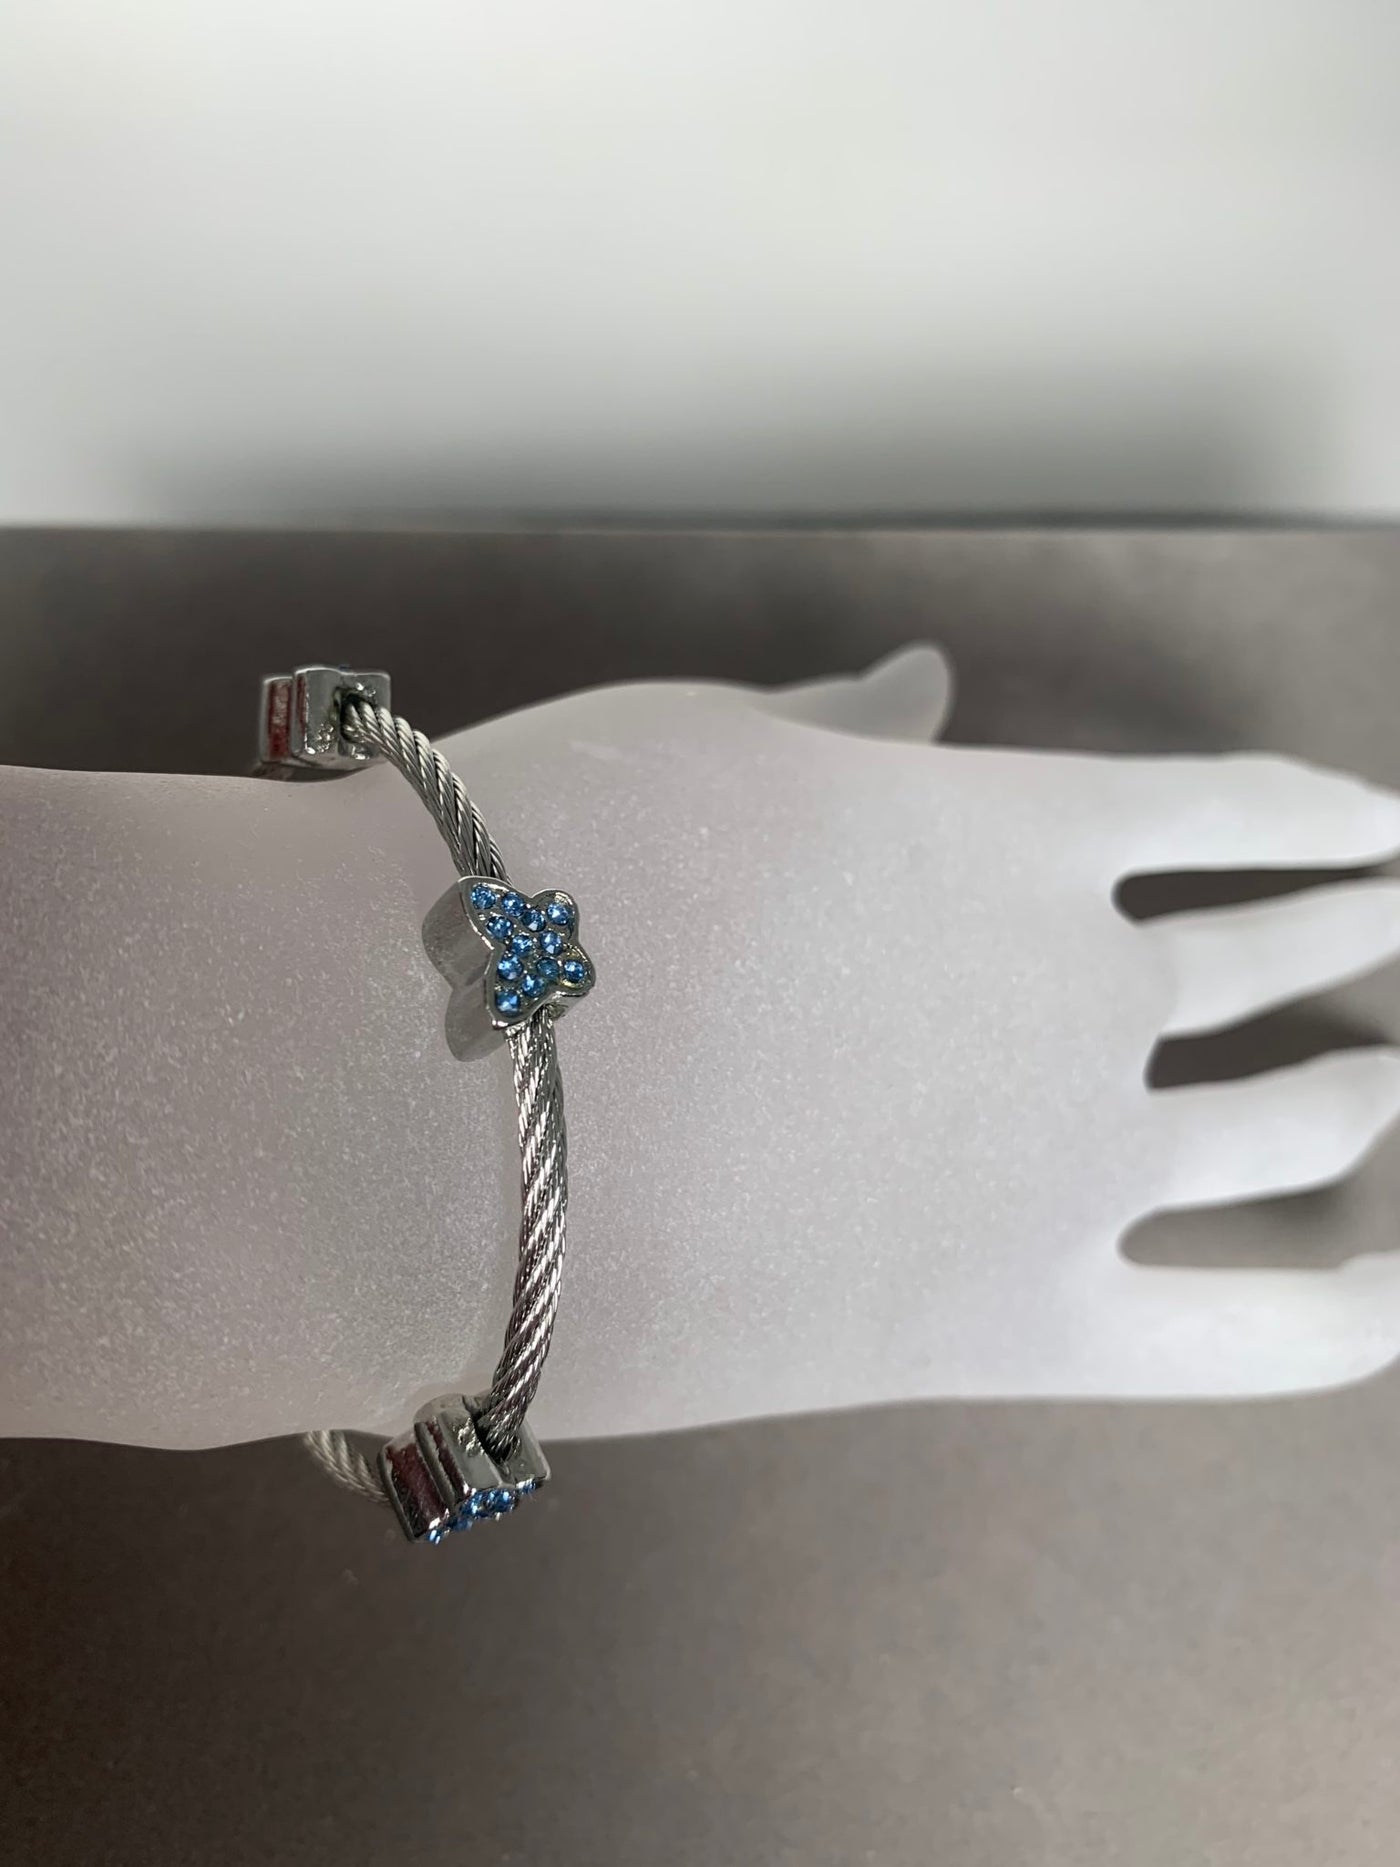 Silver Tone Wire Bangle Bracelet with 3 Blue Pave Crystal Motifs